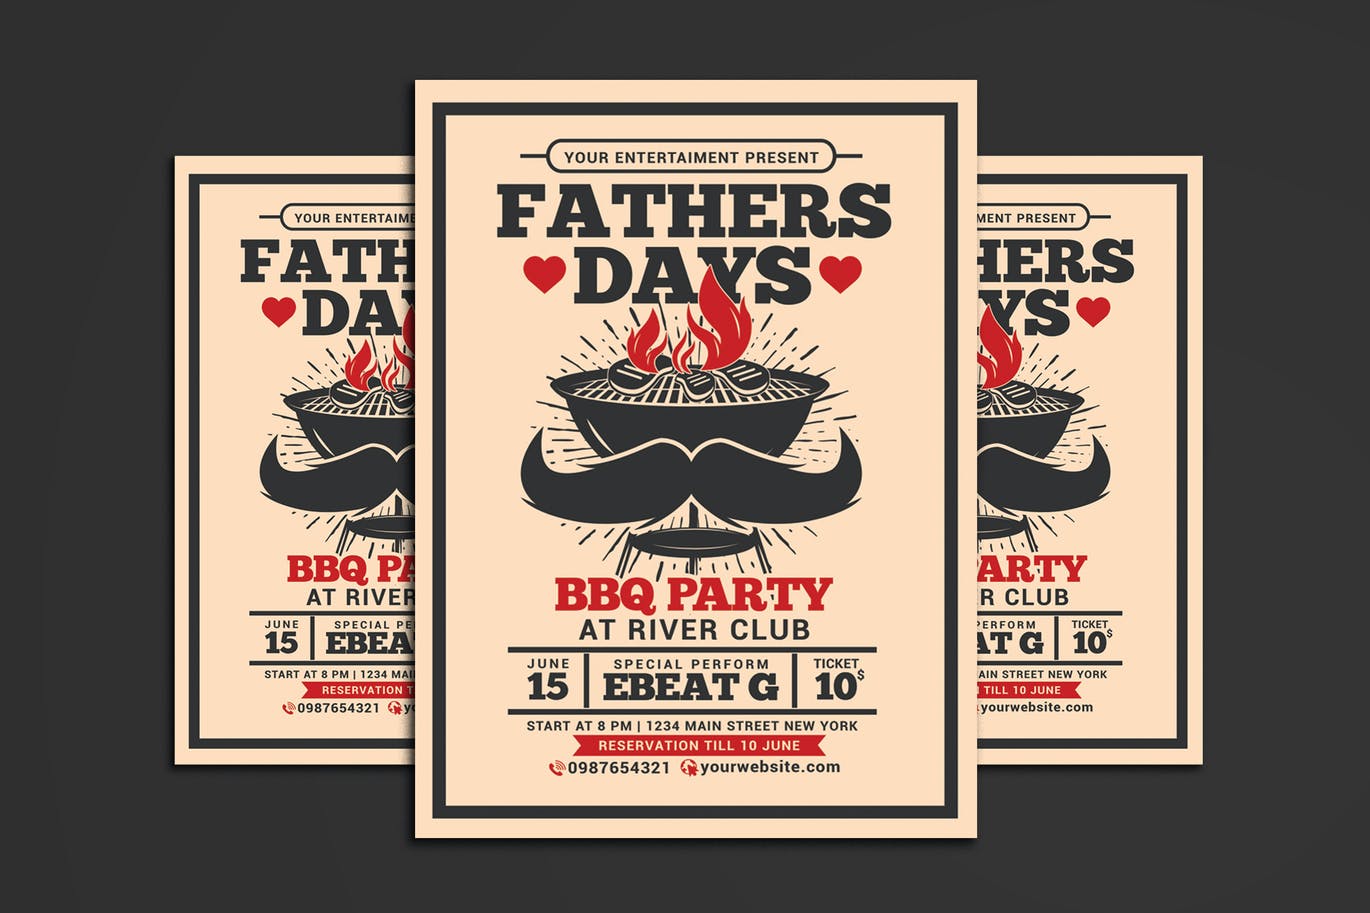 A fathers day bbq party flyer